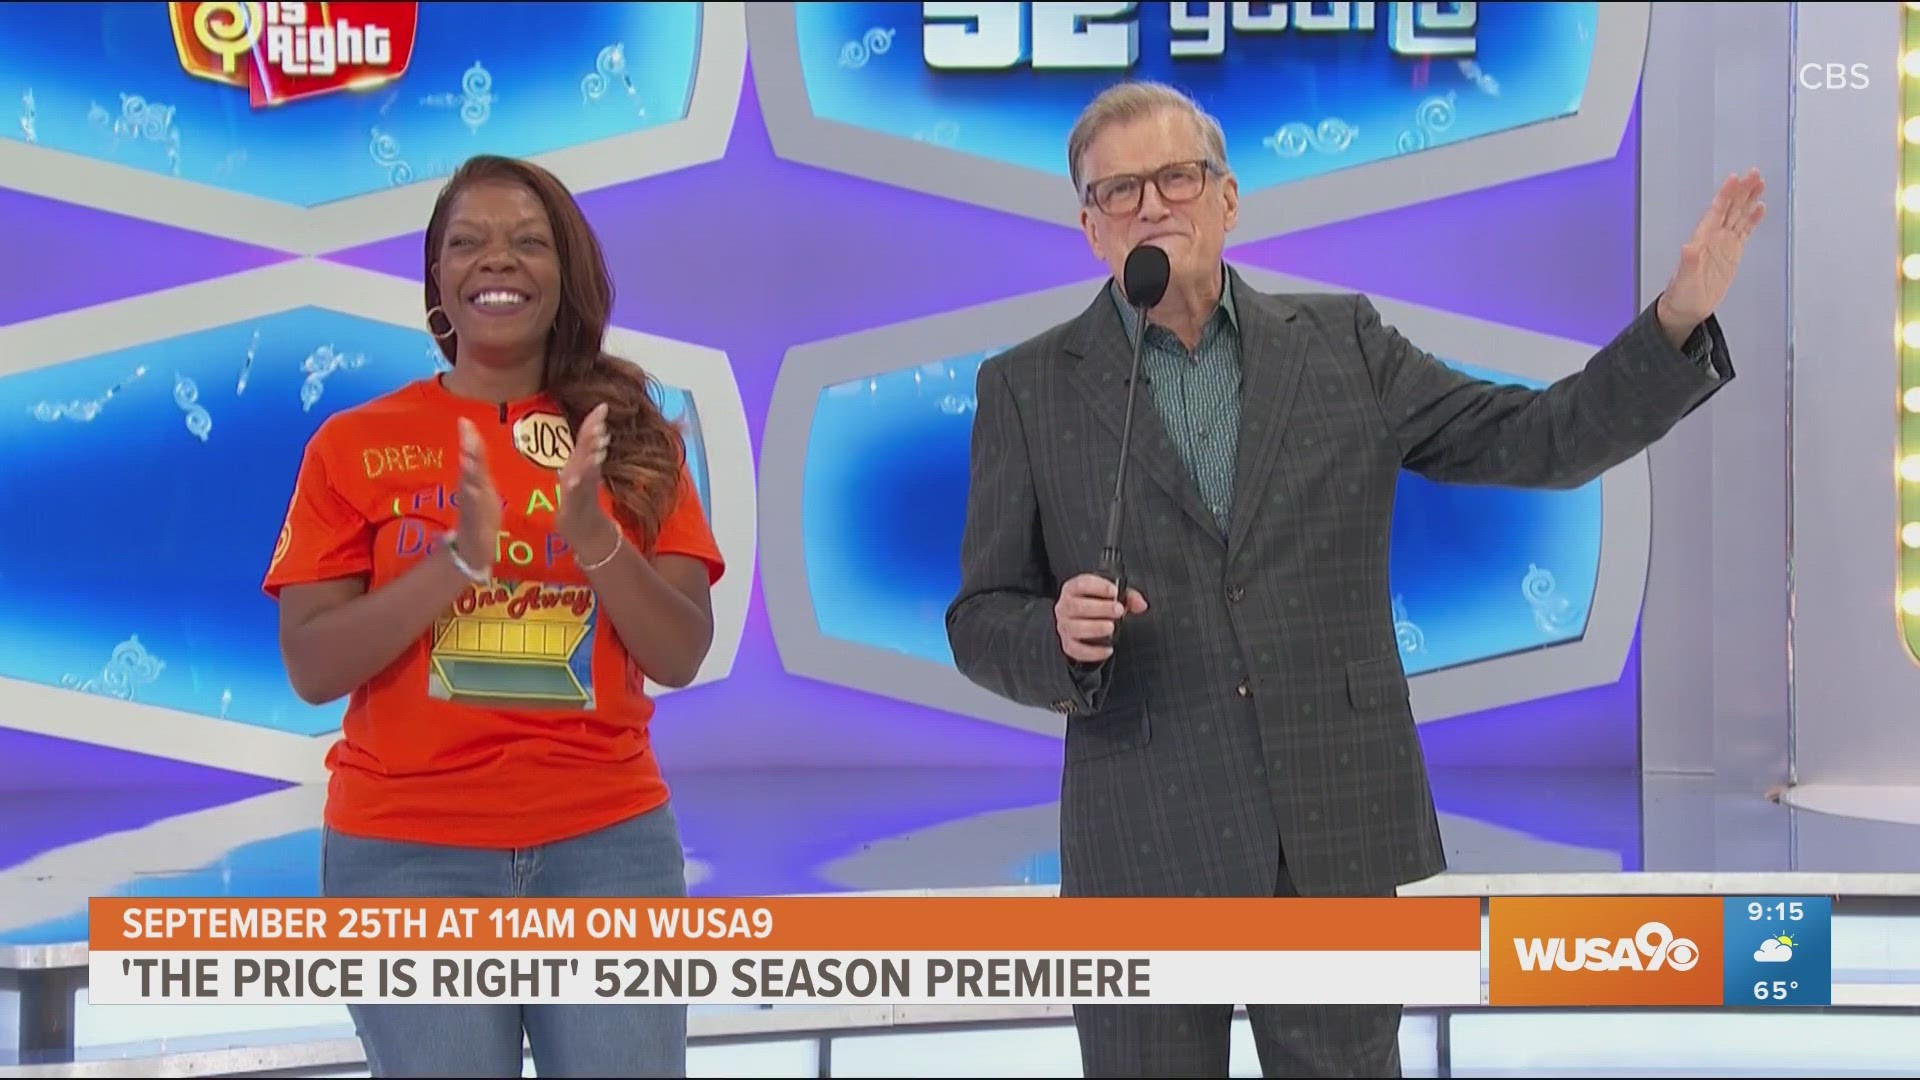 Drew Carey shares his excitement about the new studio and full studio audience ahead of the 52nd premiere of 'The Price is Right'